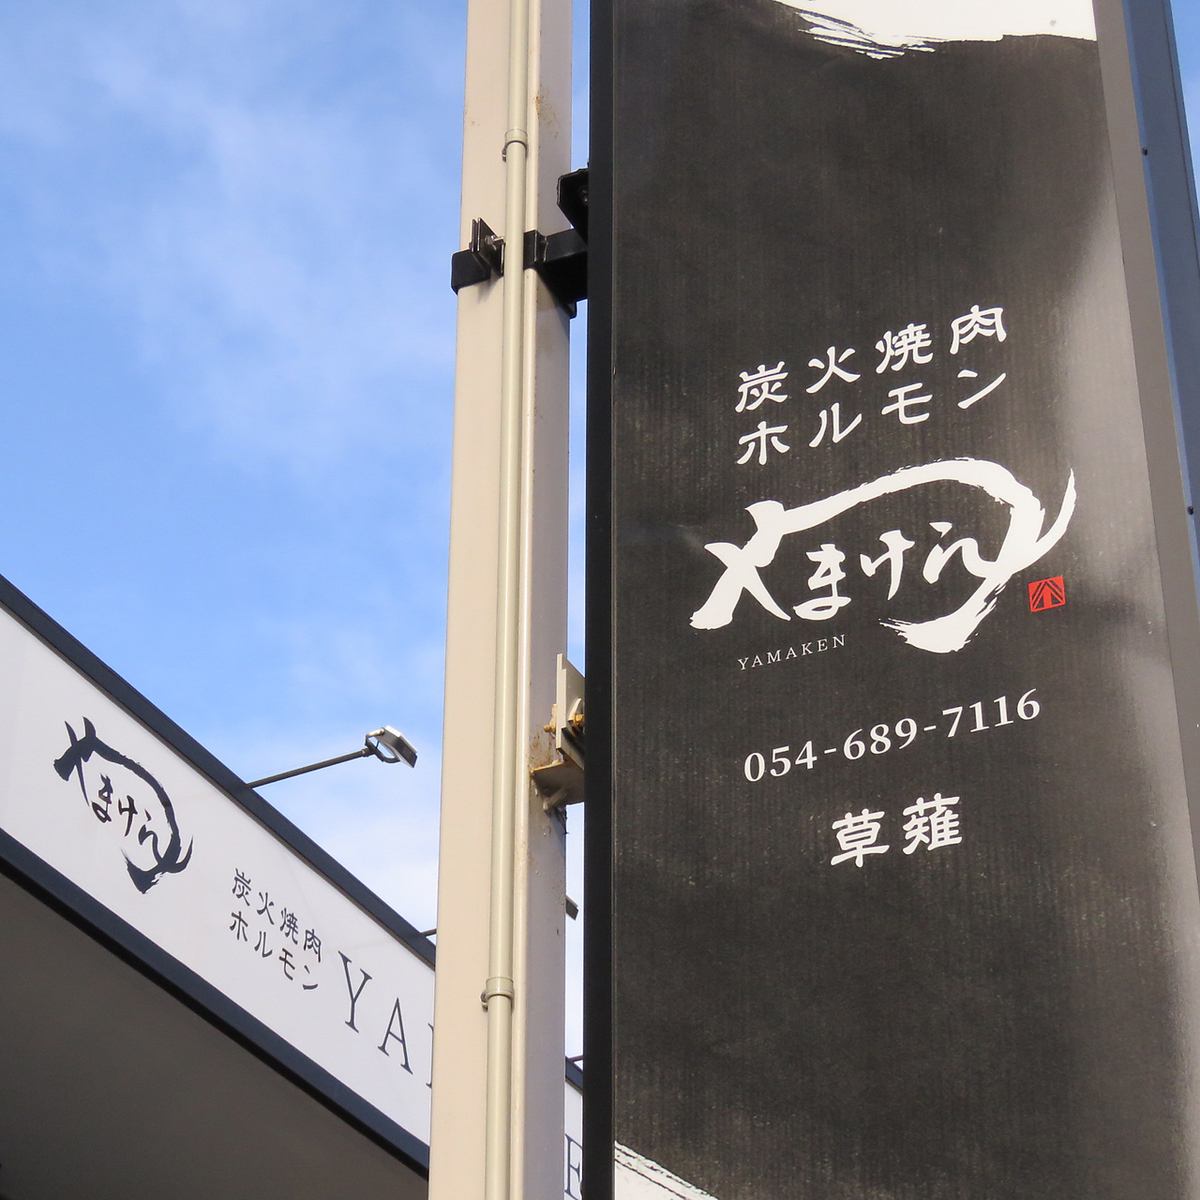 [Popular restaurant Yamaken is now in Kusanagi!] First come, first served!